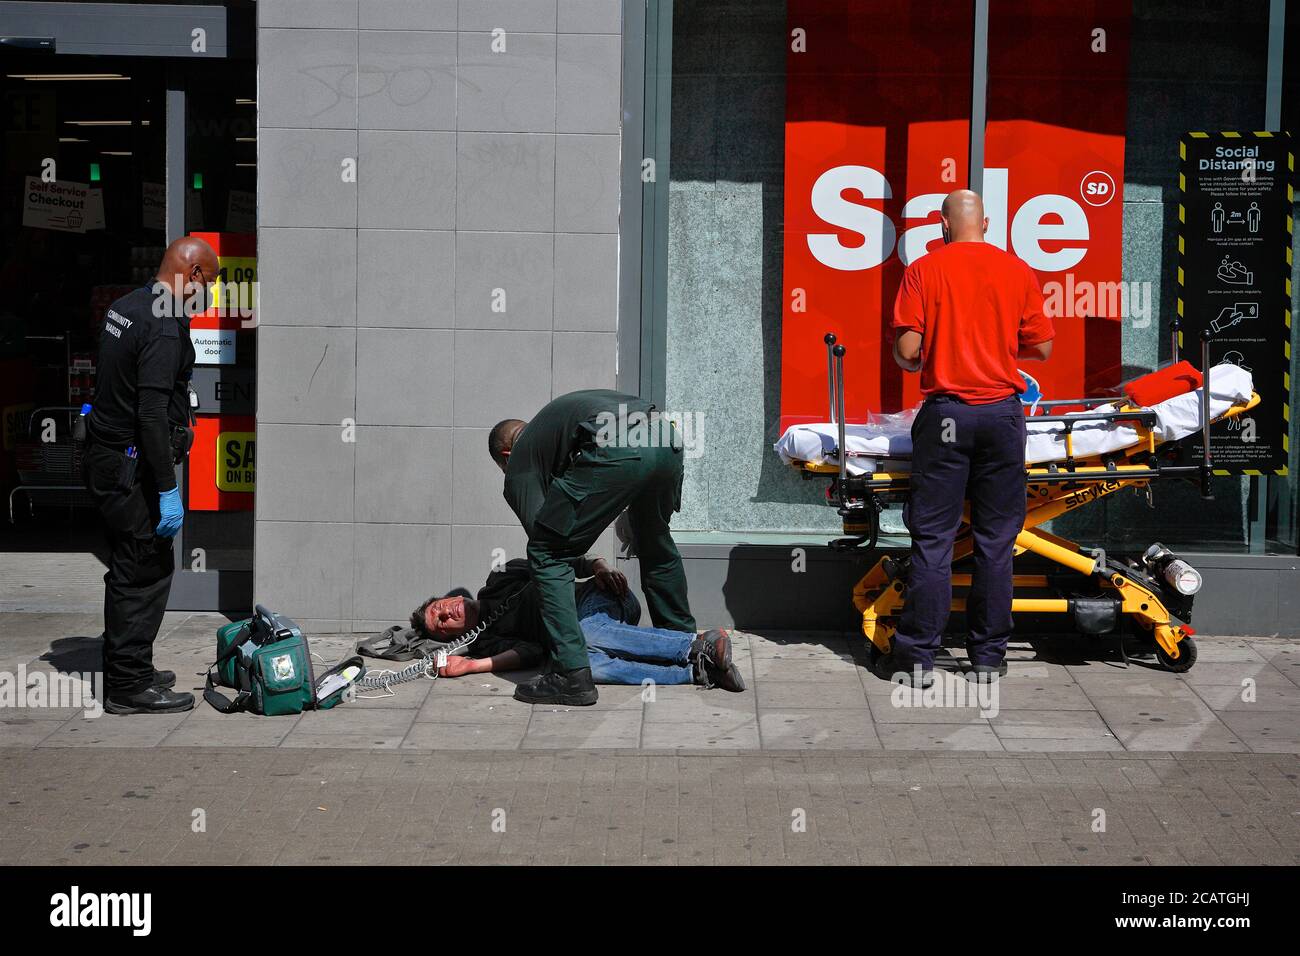 London (UK), August 7 2020: A man who has apparently collapsed on the street receives roadside medical attention. Stock Photo